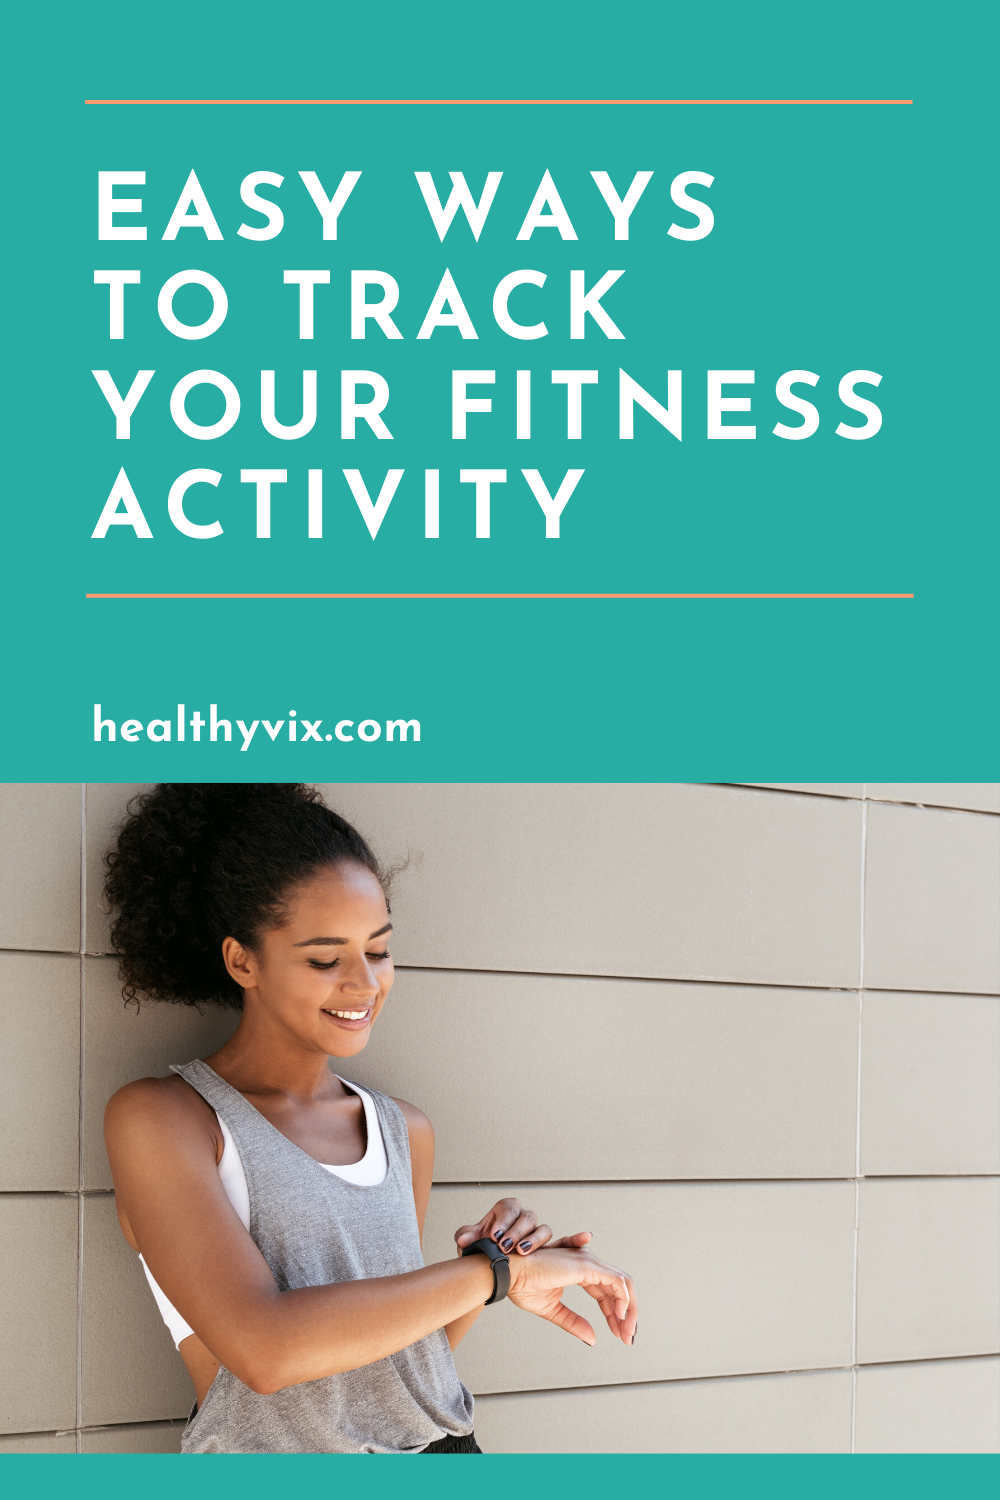 Easy ways to track your fitness activity